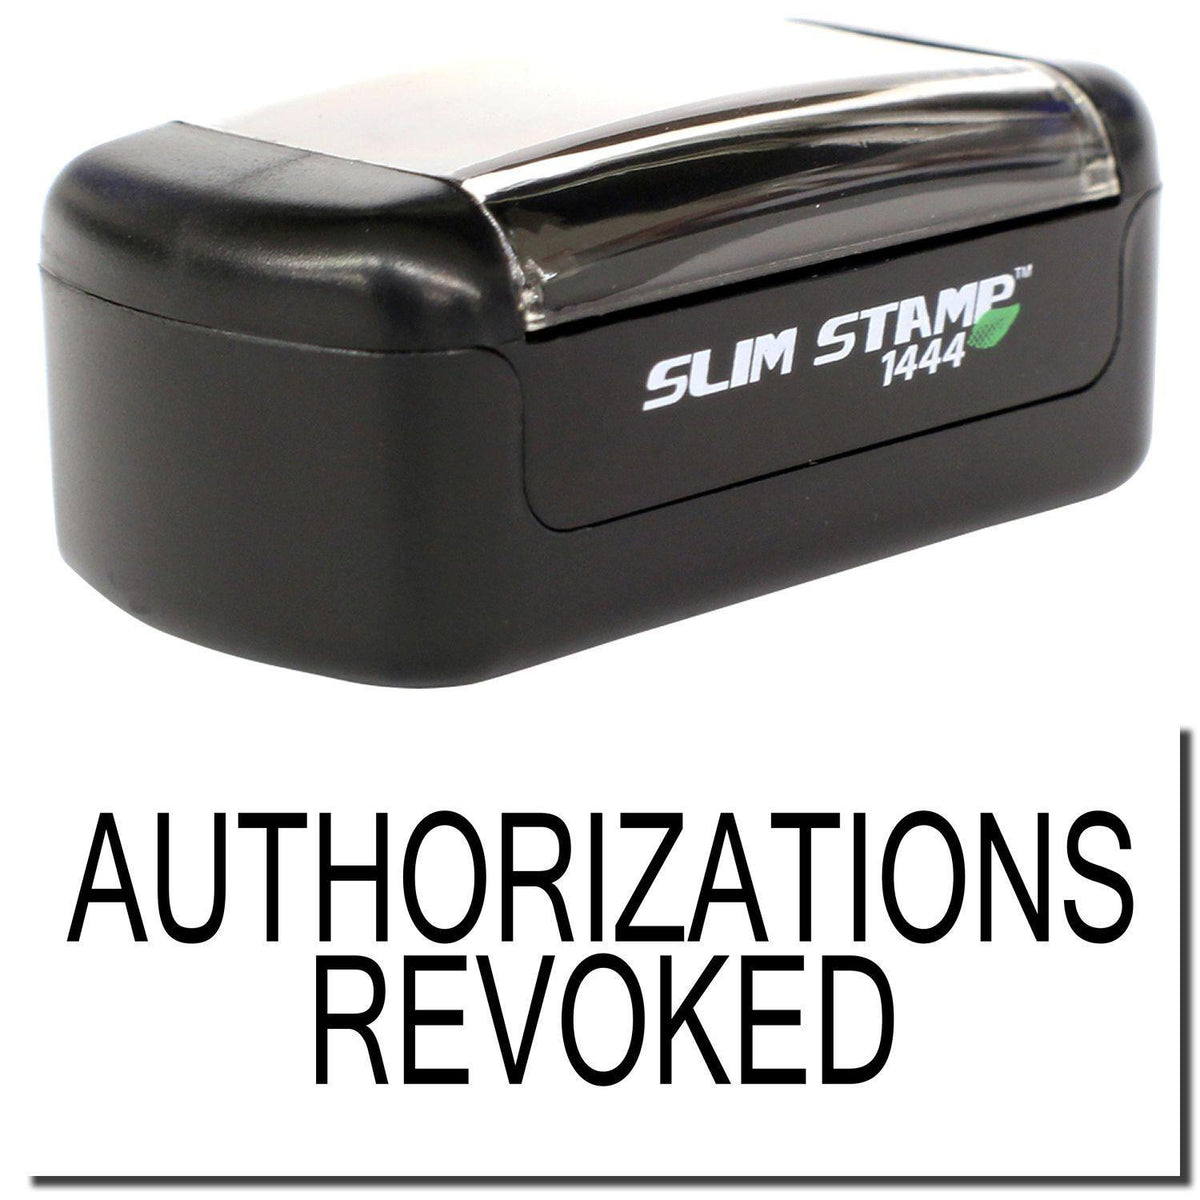 A stock office pre-inked stamp with a stamped image showing how the text &quot;AUTHORIZATIONS REVOKED&quot; is displayed after stamping.